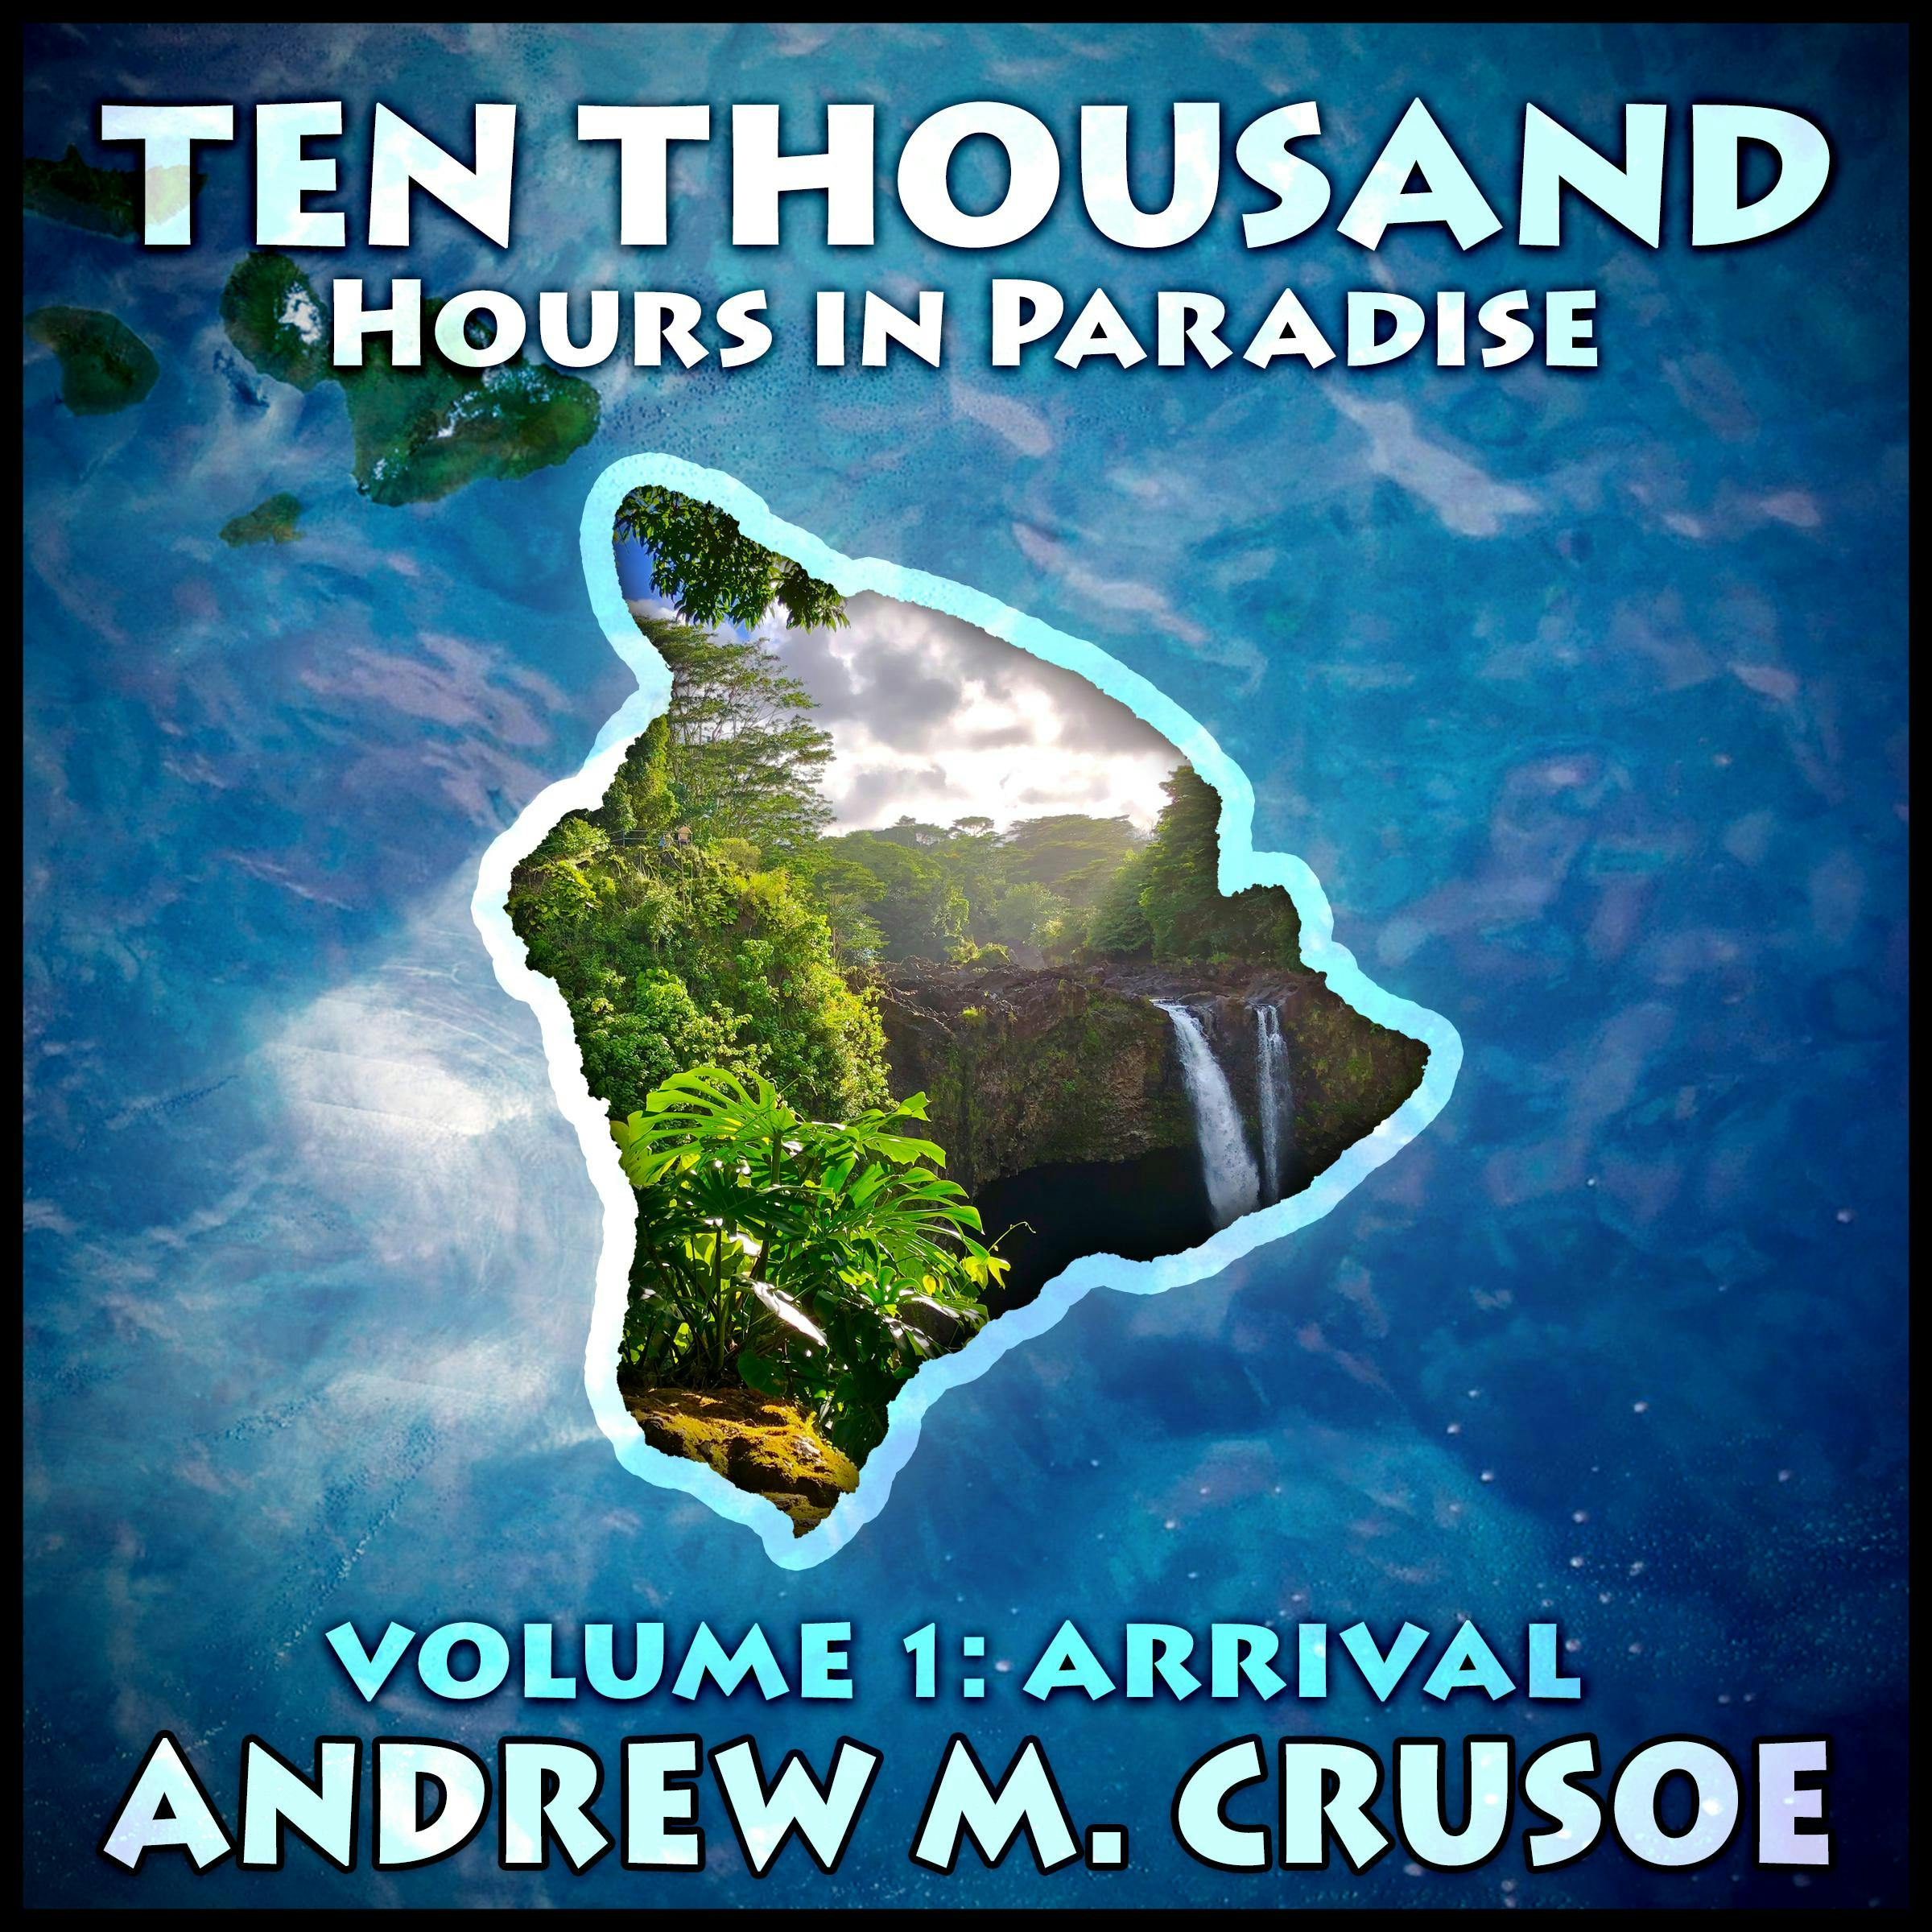 Ten Thousand Hours in Paradise: Volume 1: Arrival - Andrew M. Crusoe